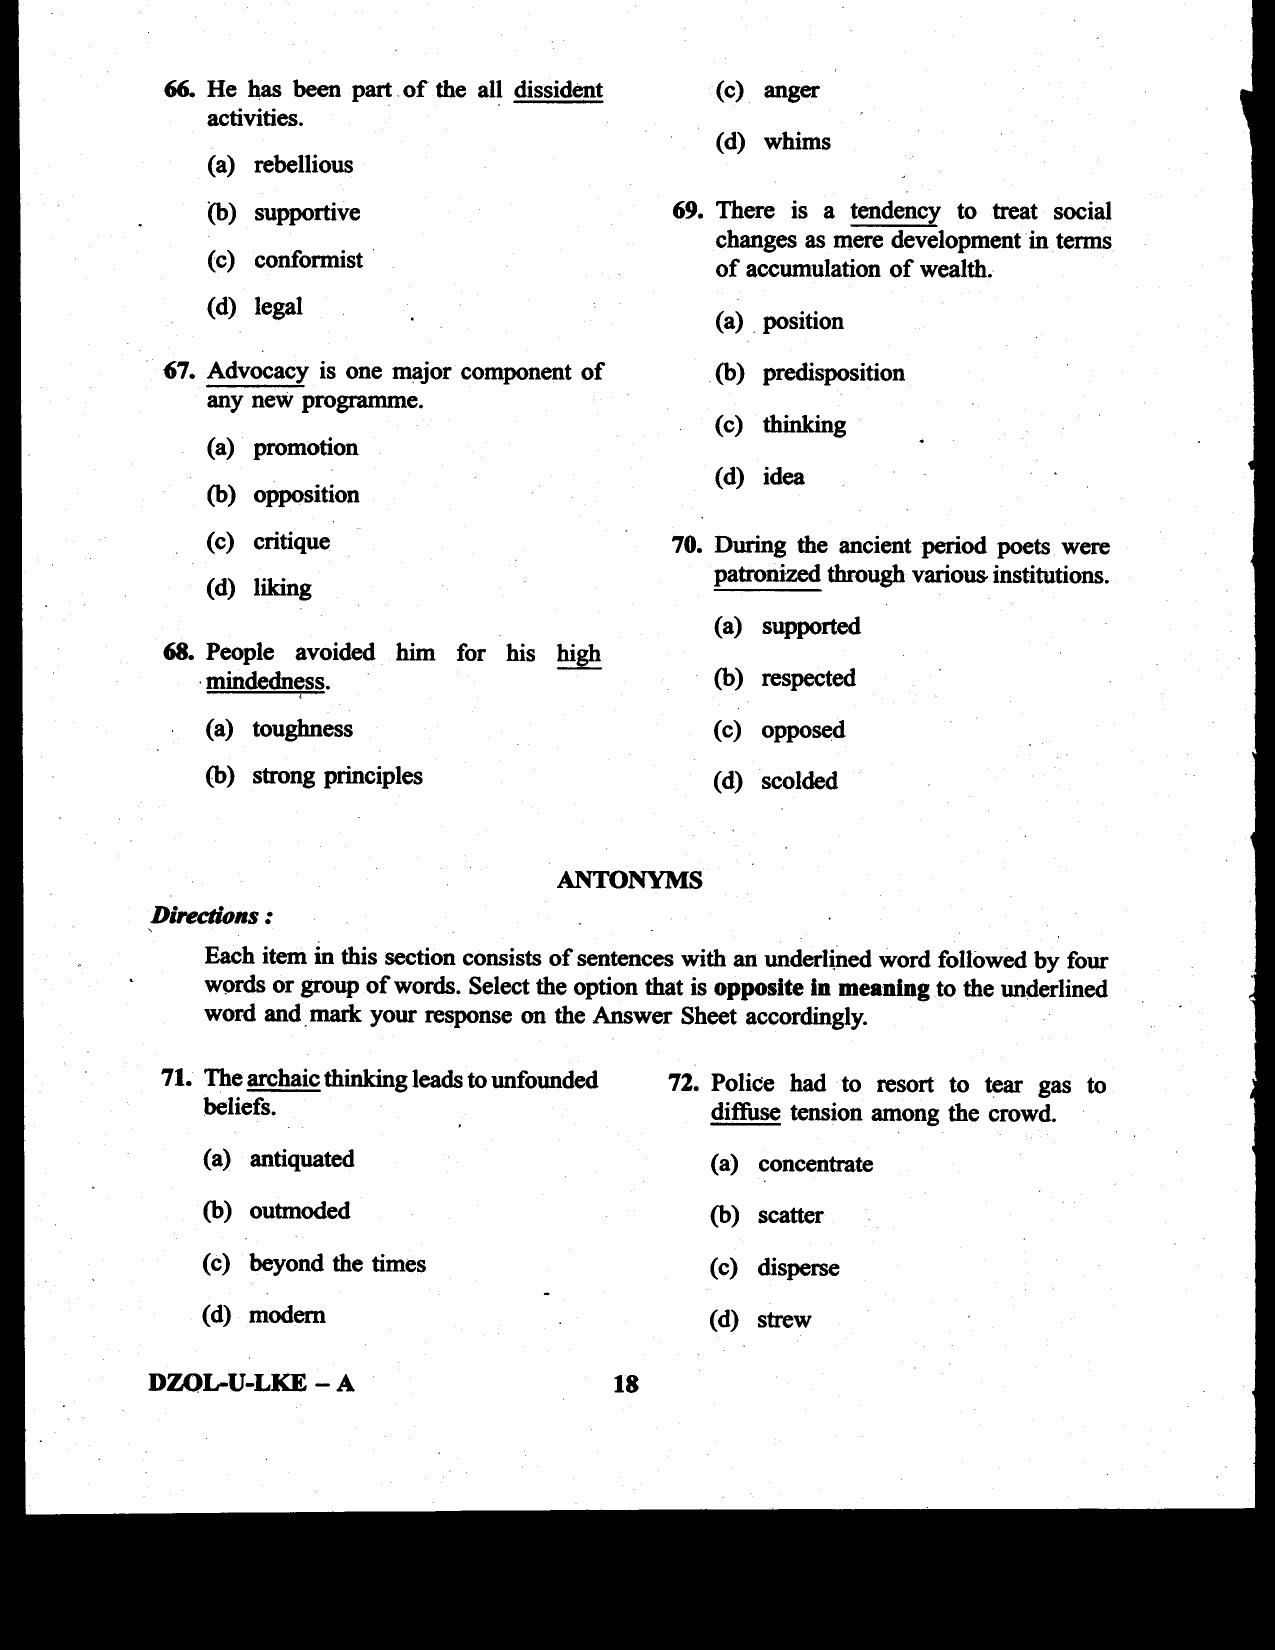 CDS II Examination 2020 English Question Paper - Image 18